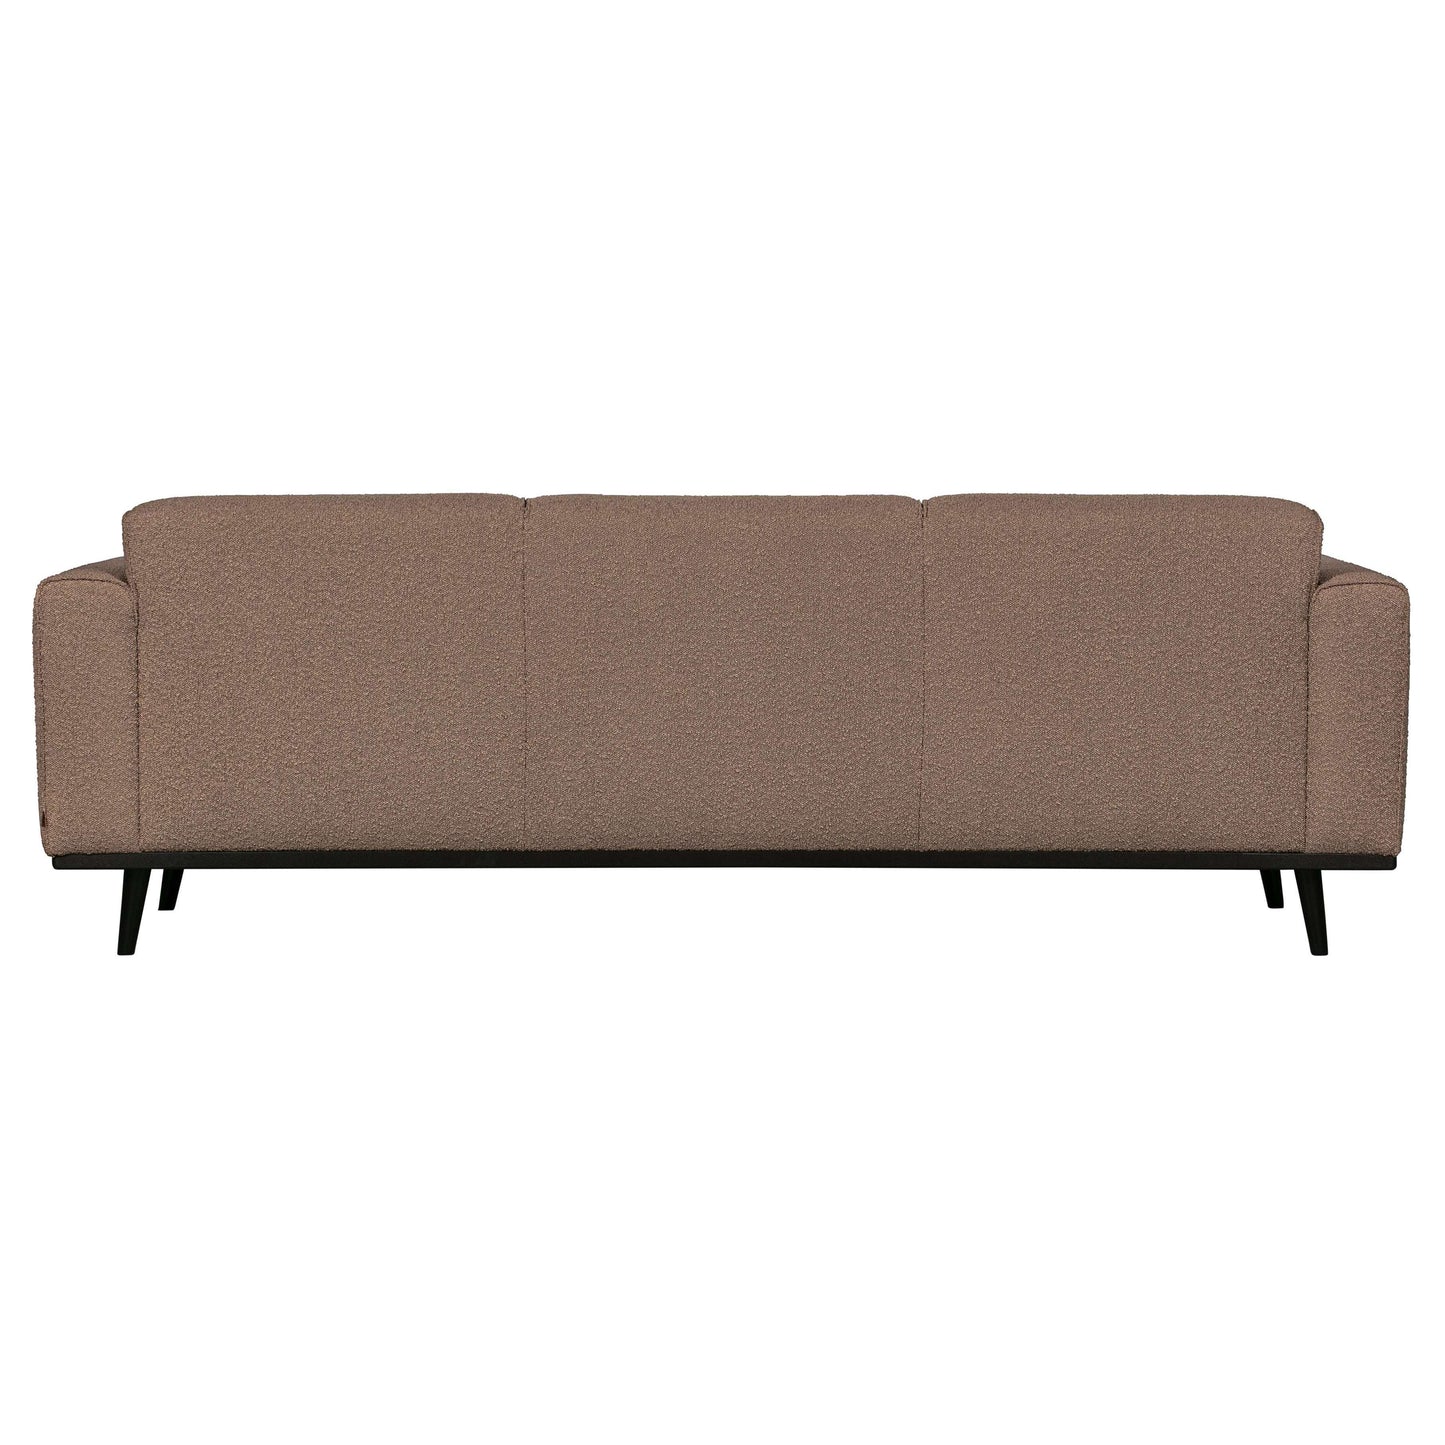 BePureHome Statement 3-zits bankboucle taupe